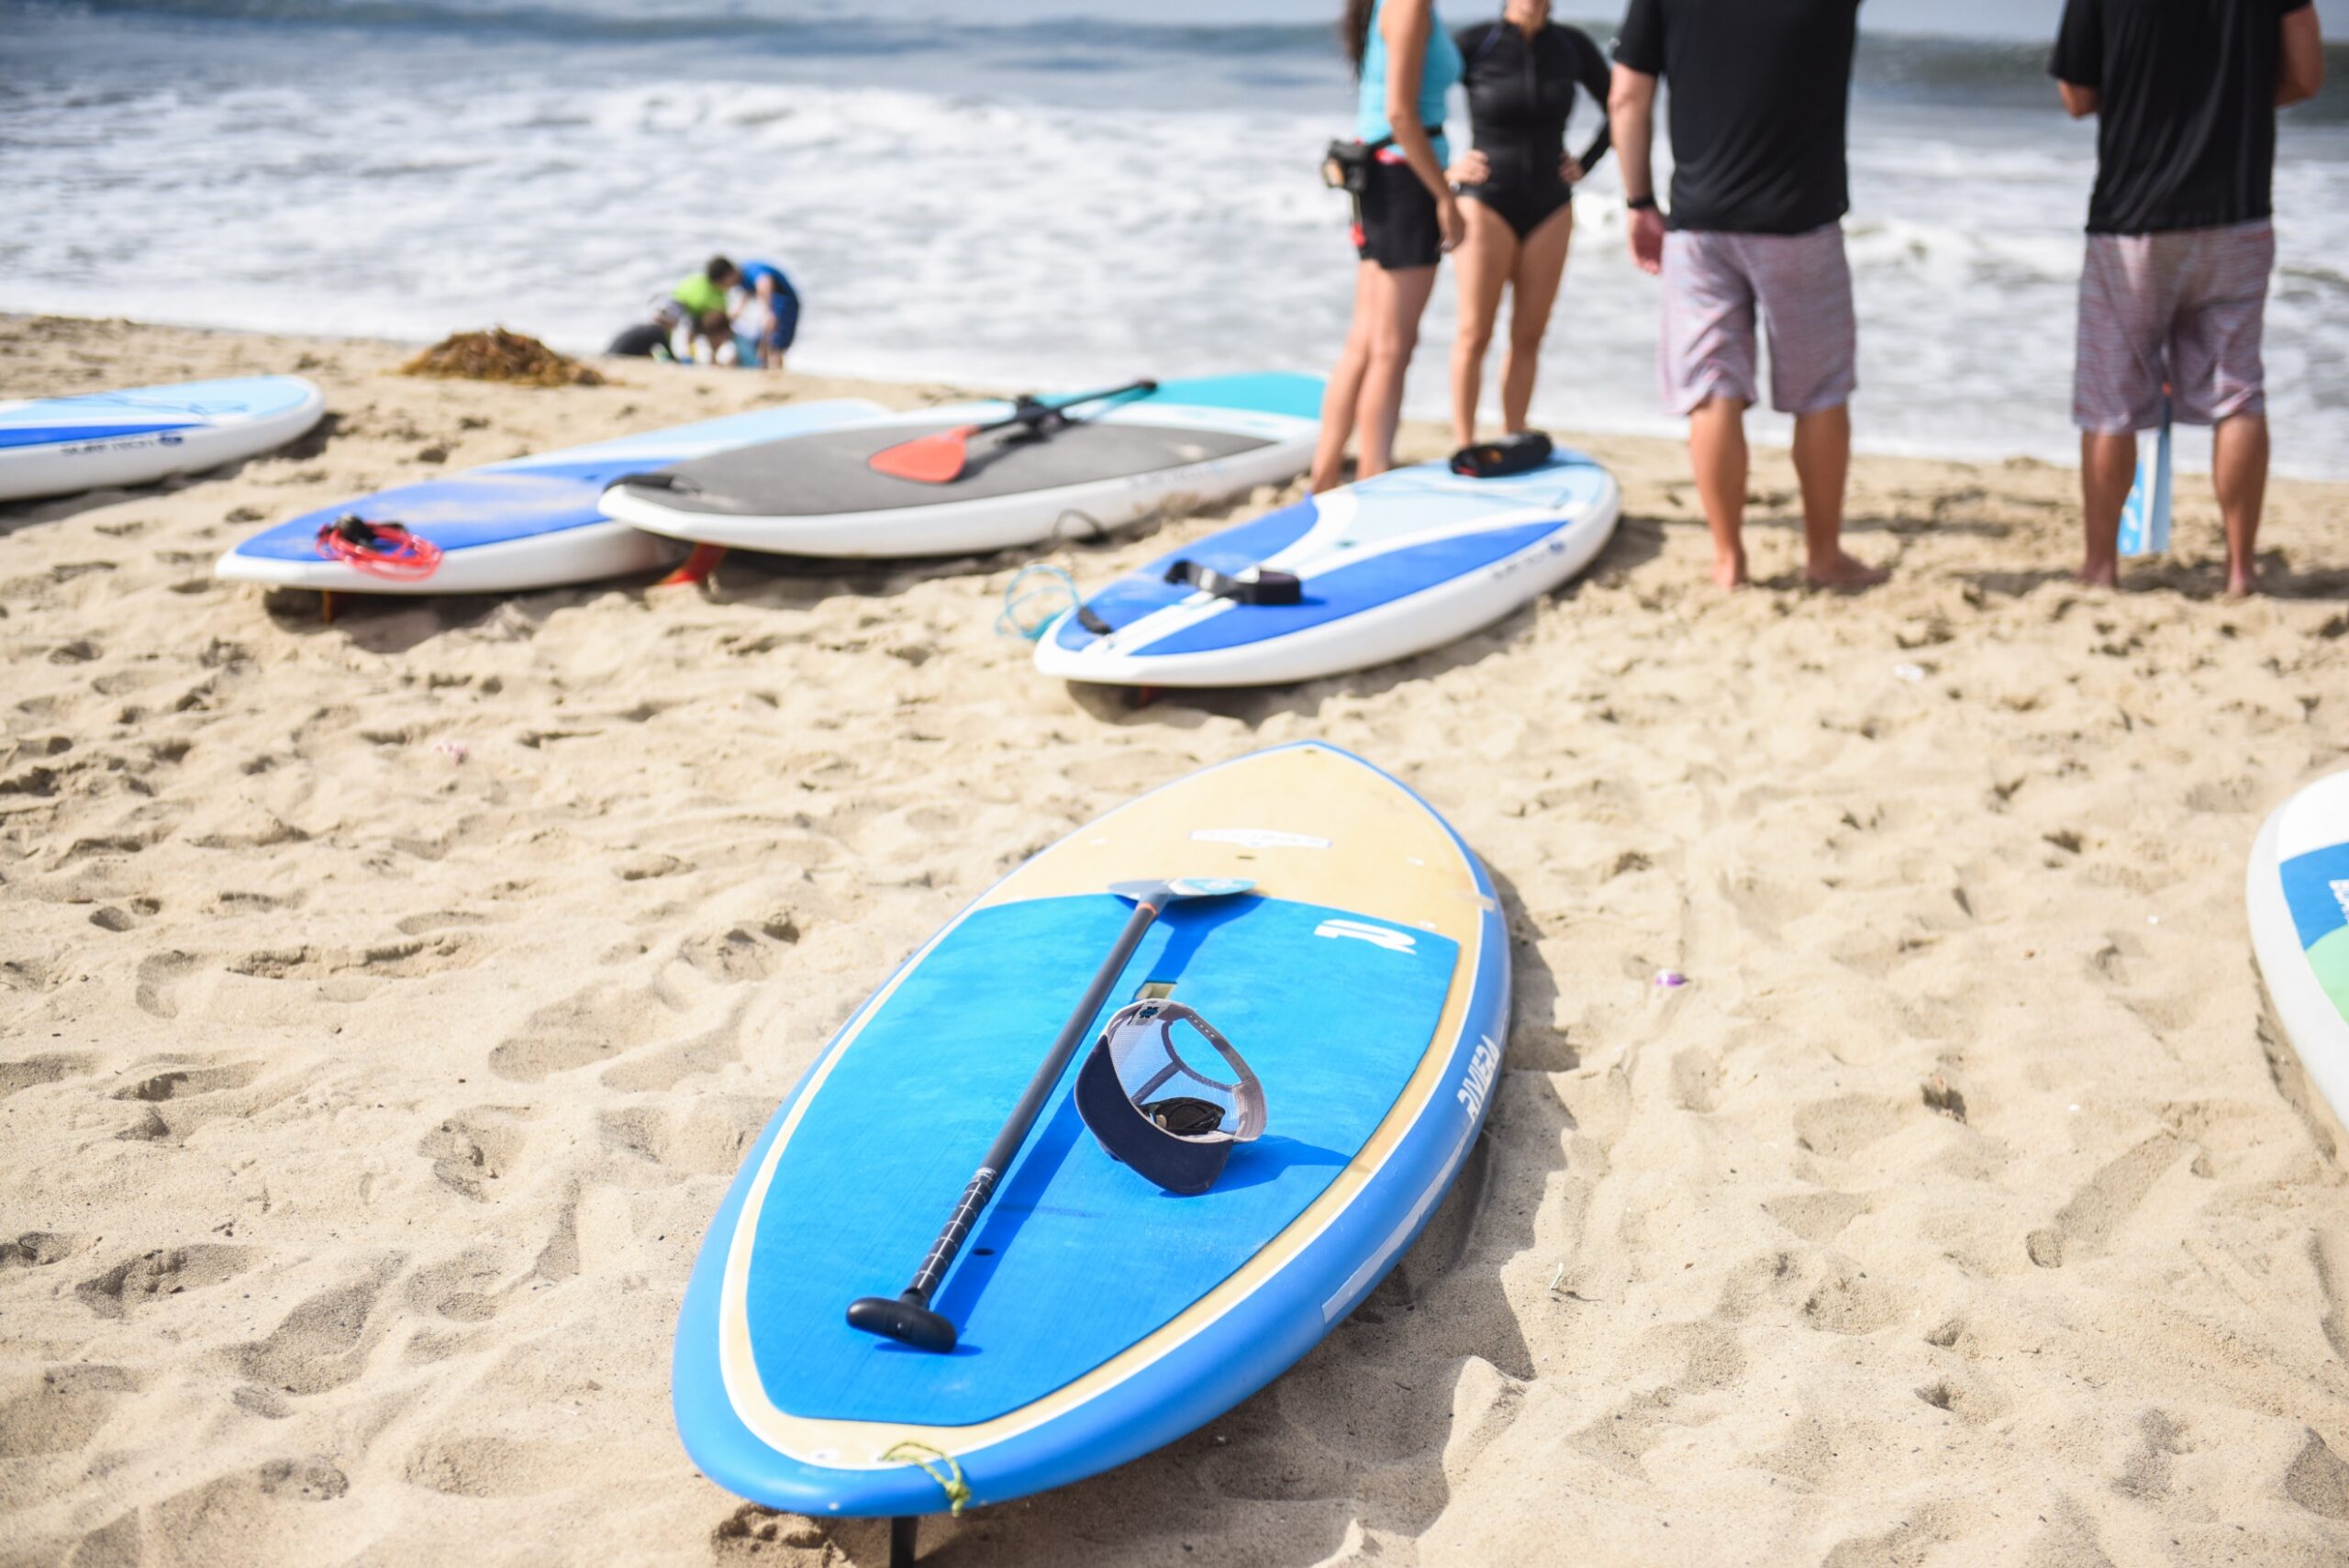 Stand-Up Paddleboard Class at the Annenberg Community Beach House